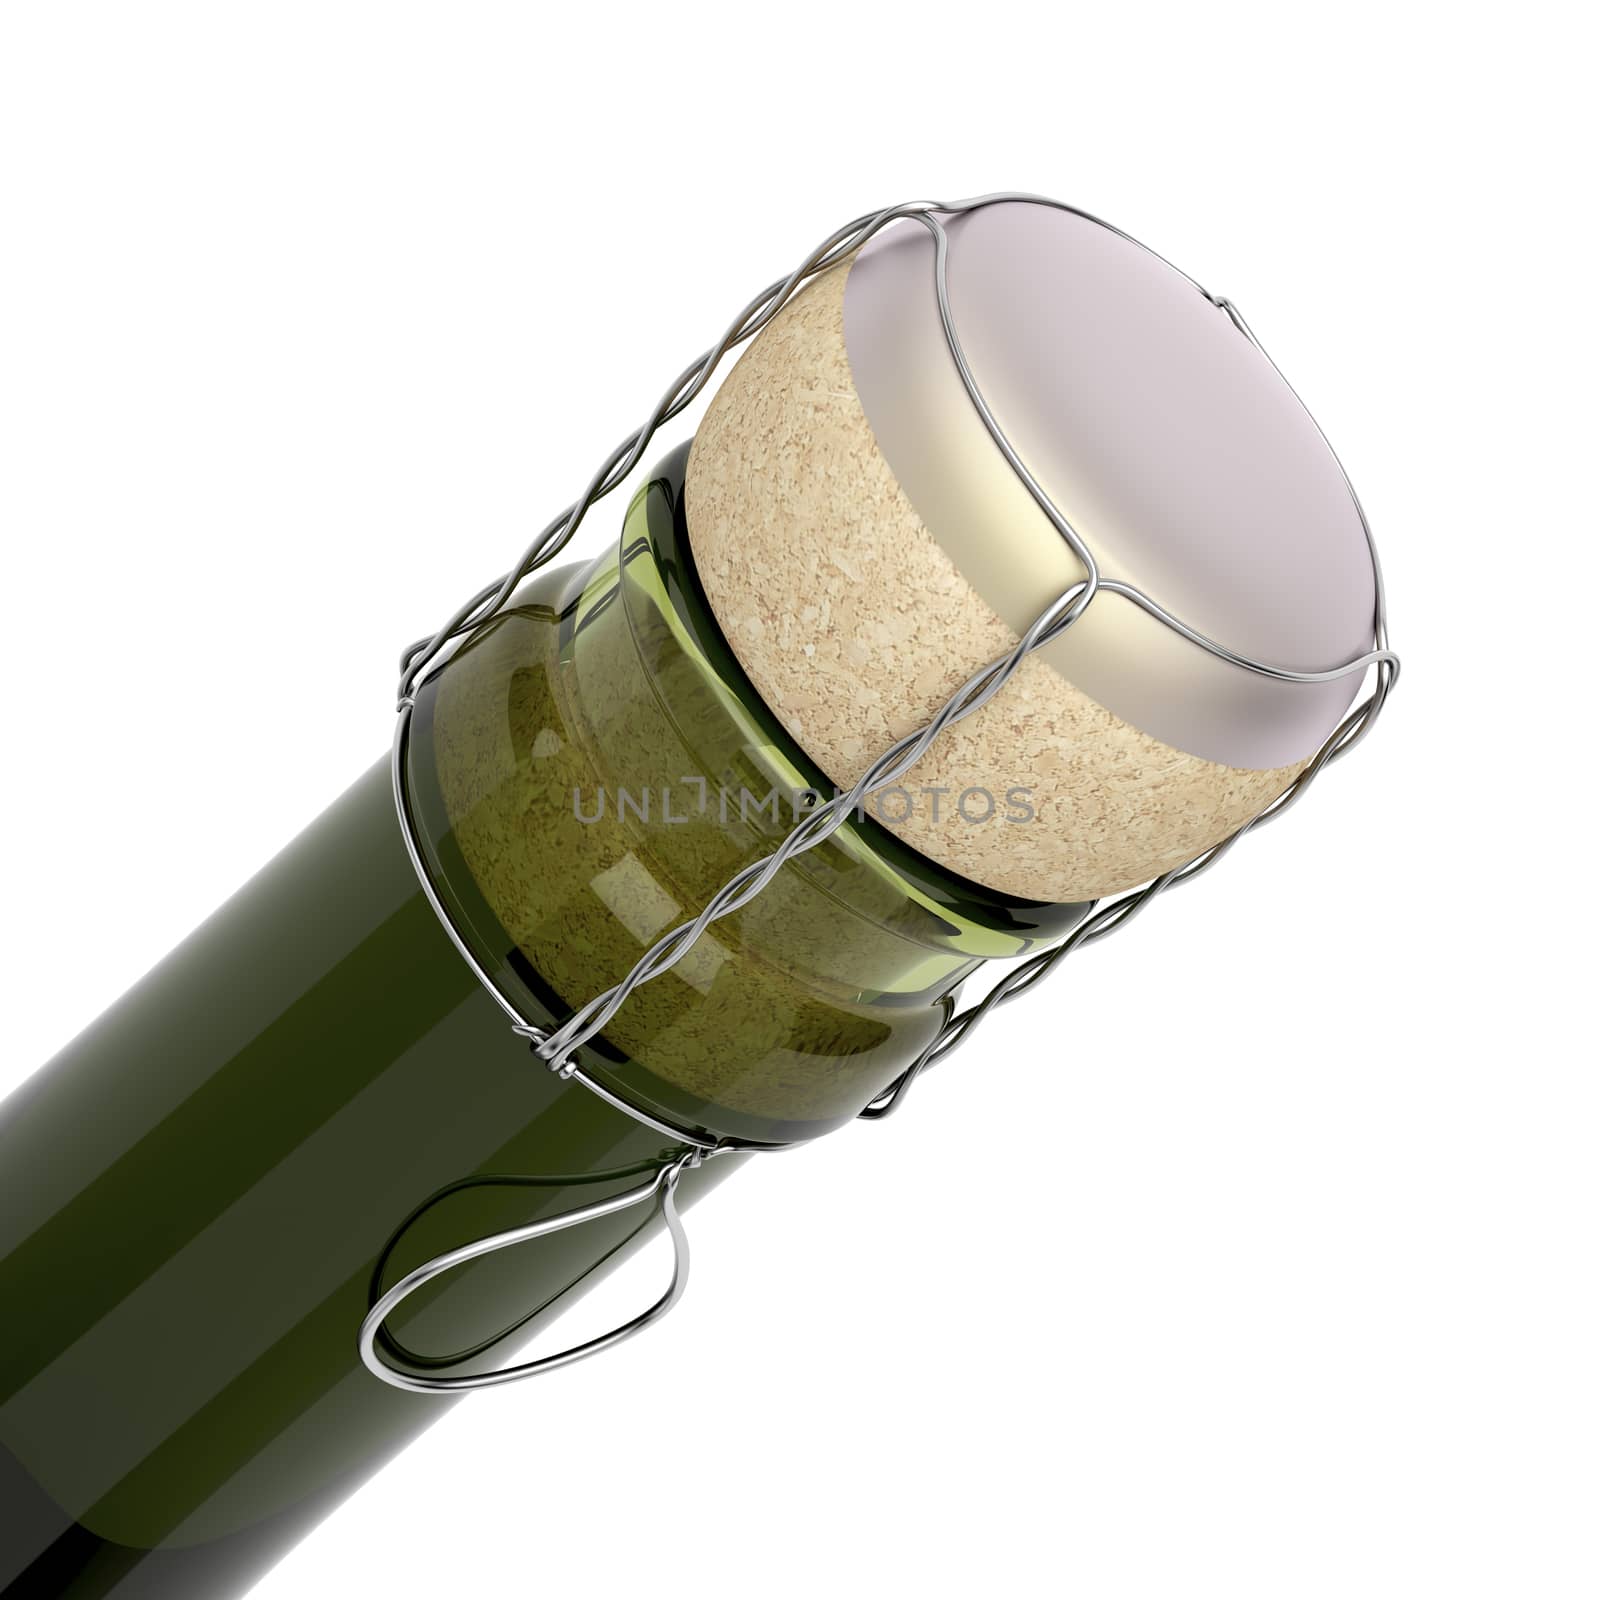 Closed champagne bottle by magraphics